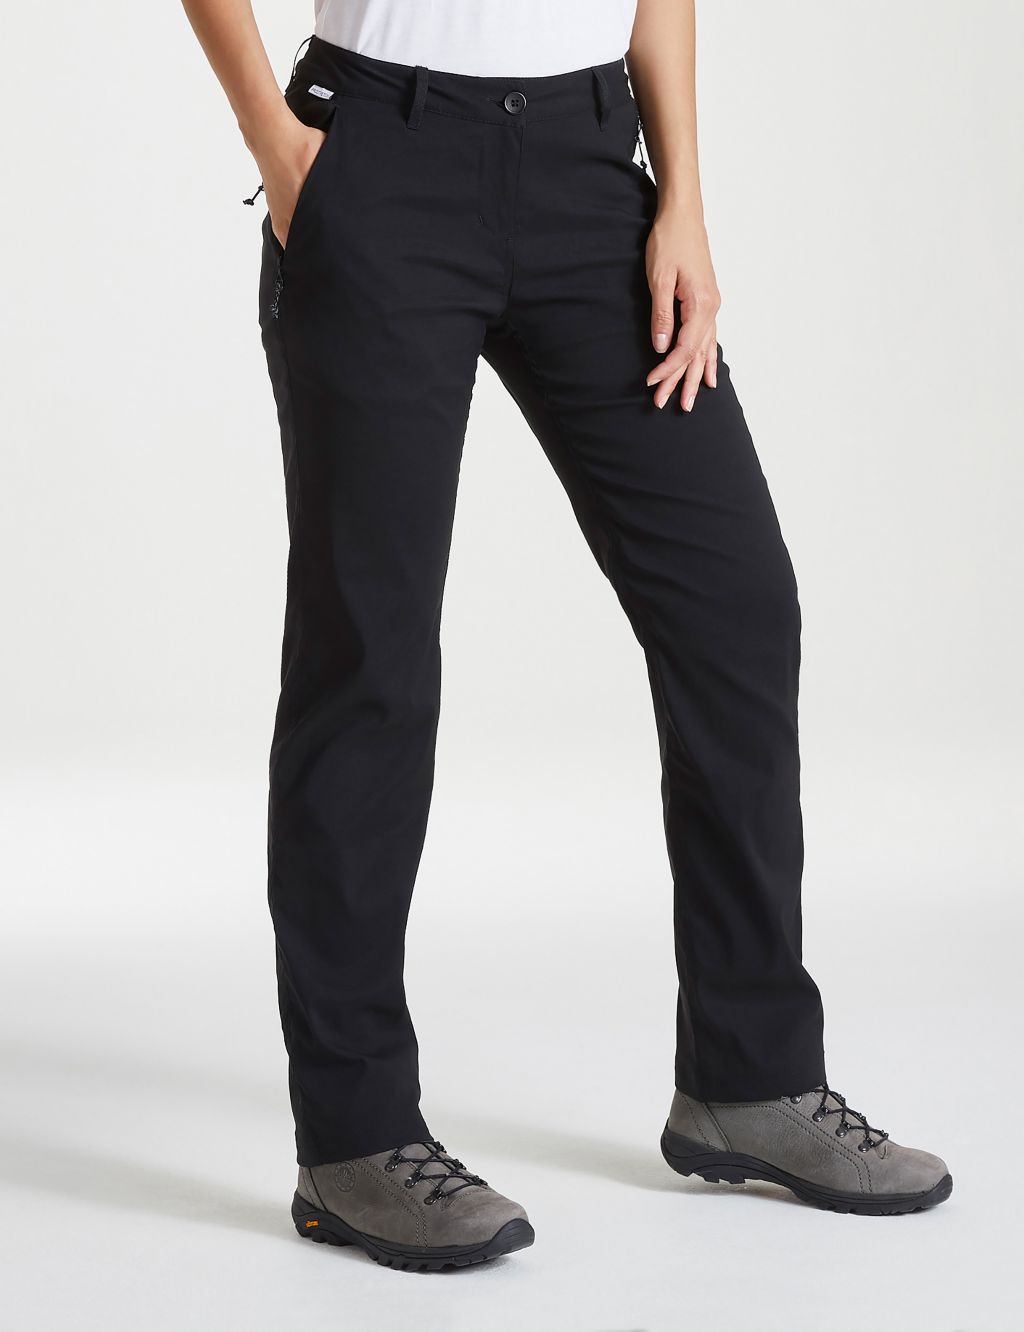 Kiwi Pro Lined Trousers 3 of 6